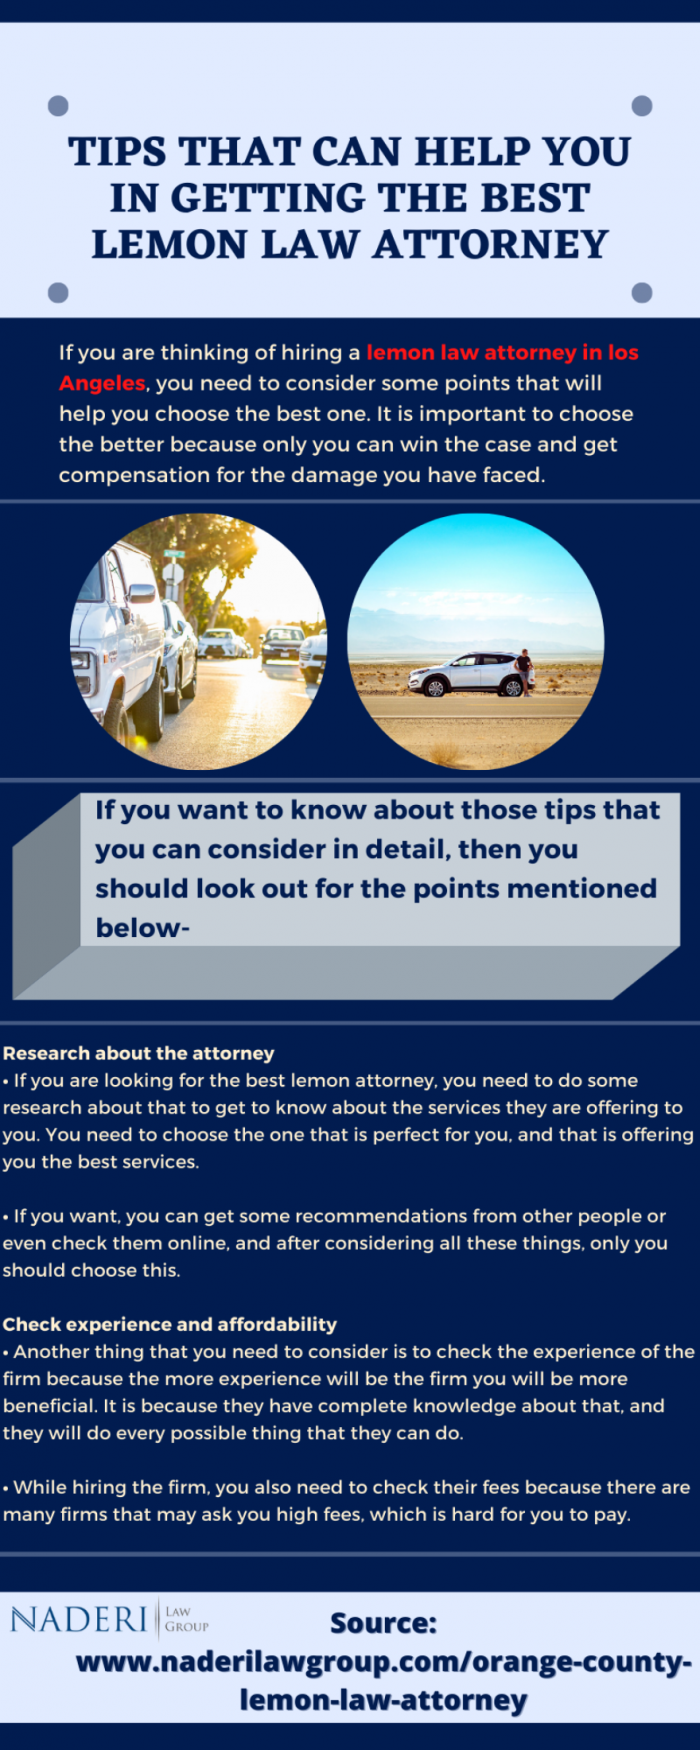 How to find the best Lemon Law Attorney